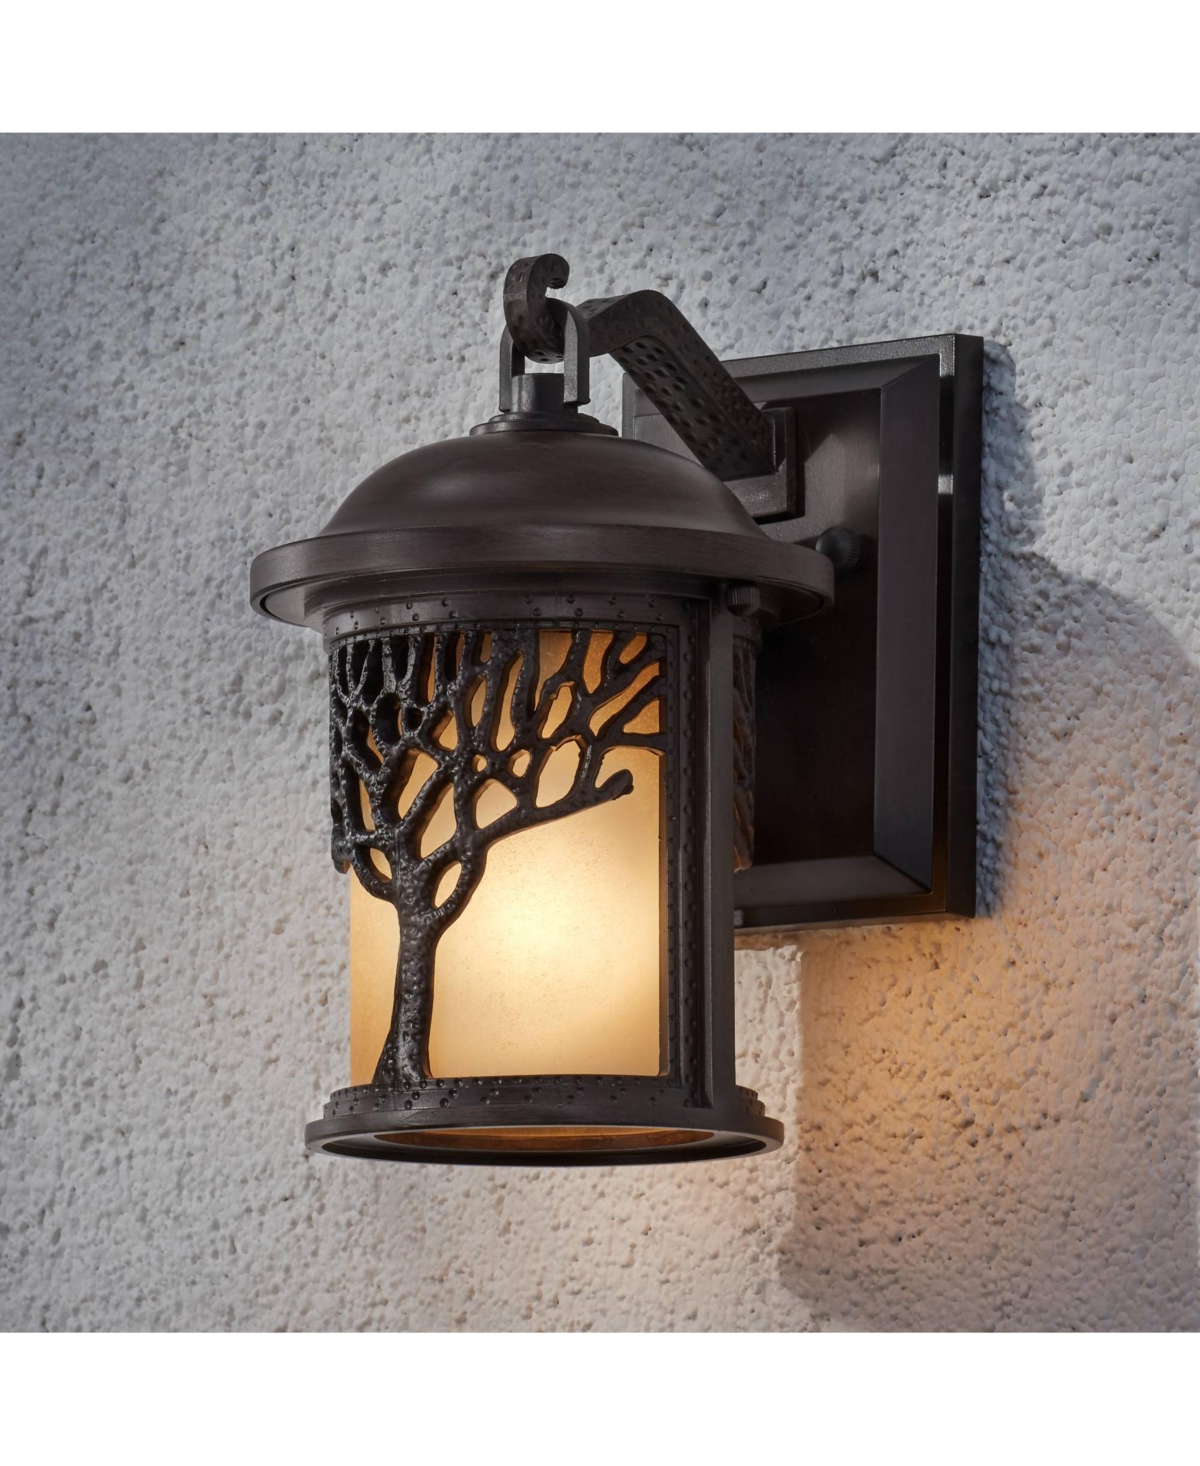 Rustic Mission Outdoor Wall Light Sconce Fixture Bronze 9 1/2" Tree Etched Glass Sconce Decor for Exterior House Porch Patio Outside Deck Garage Yard